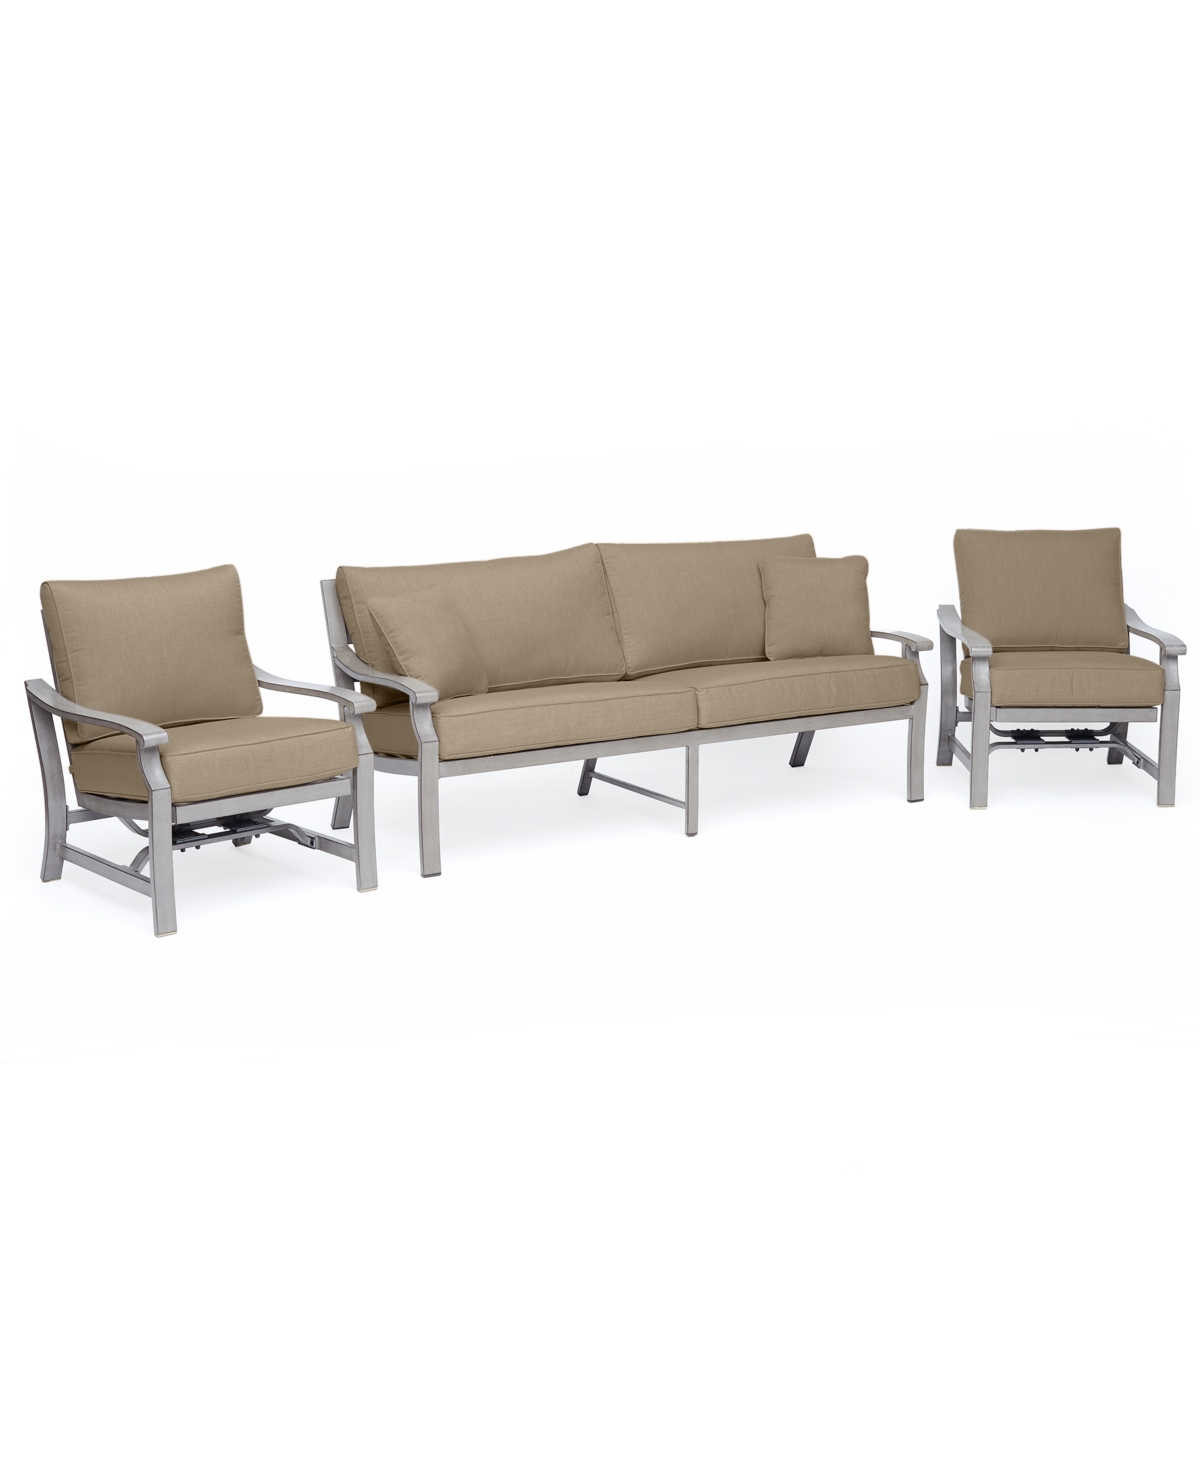 Shop Agio Tara Aluminum Outdoor 3-pc. Seating Set (1 Sofa & 2 Rocker Chairs), Created For Macy's In Outdura Remy Pebble